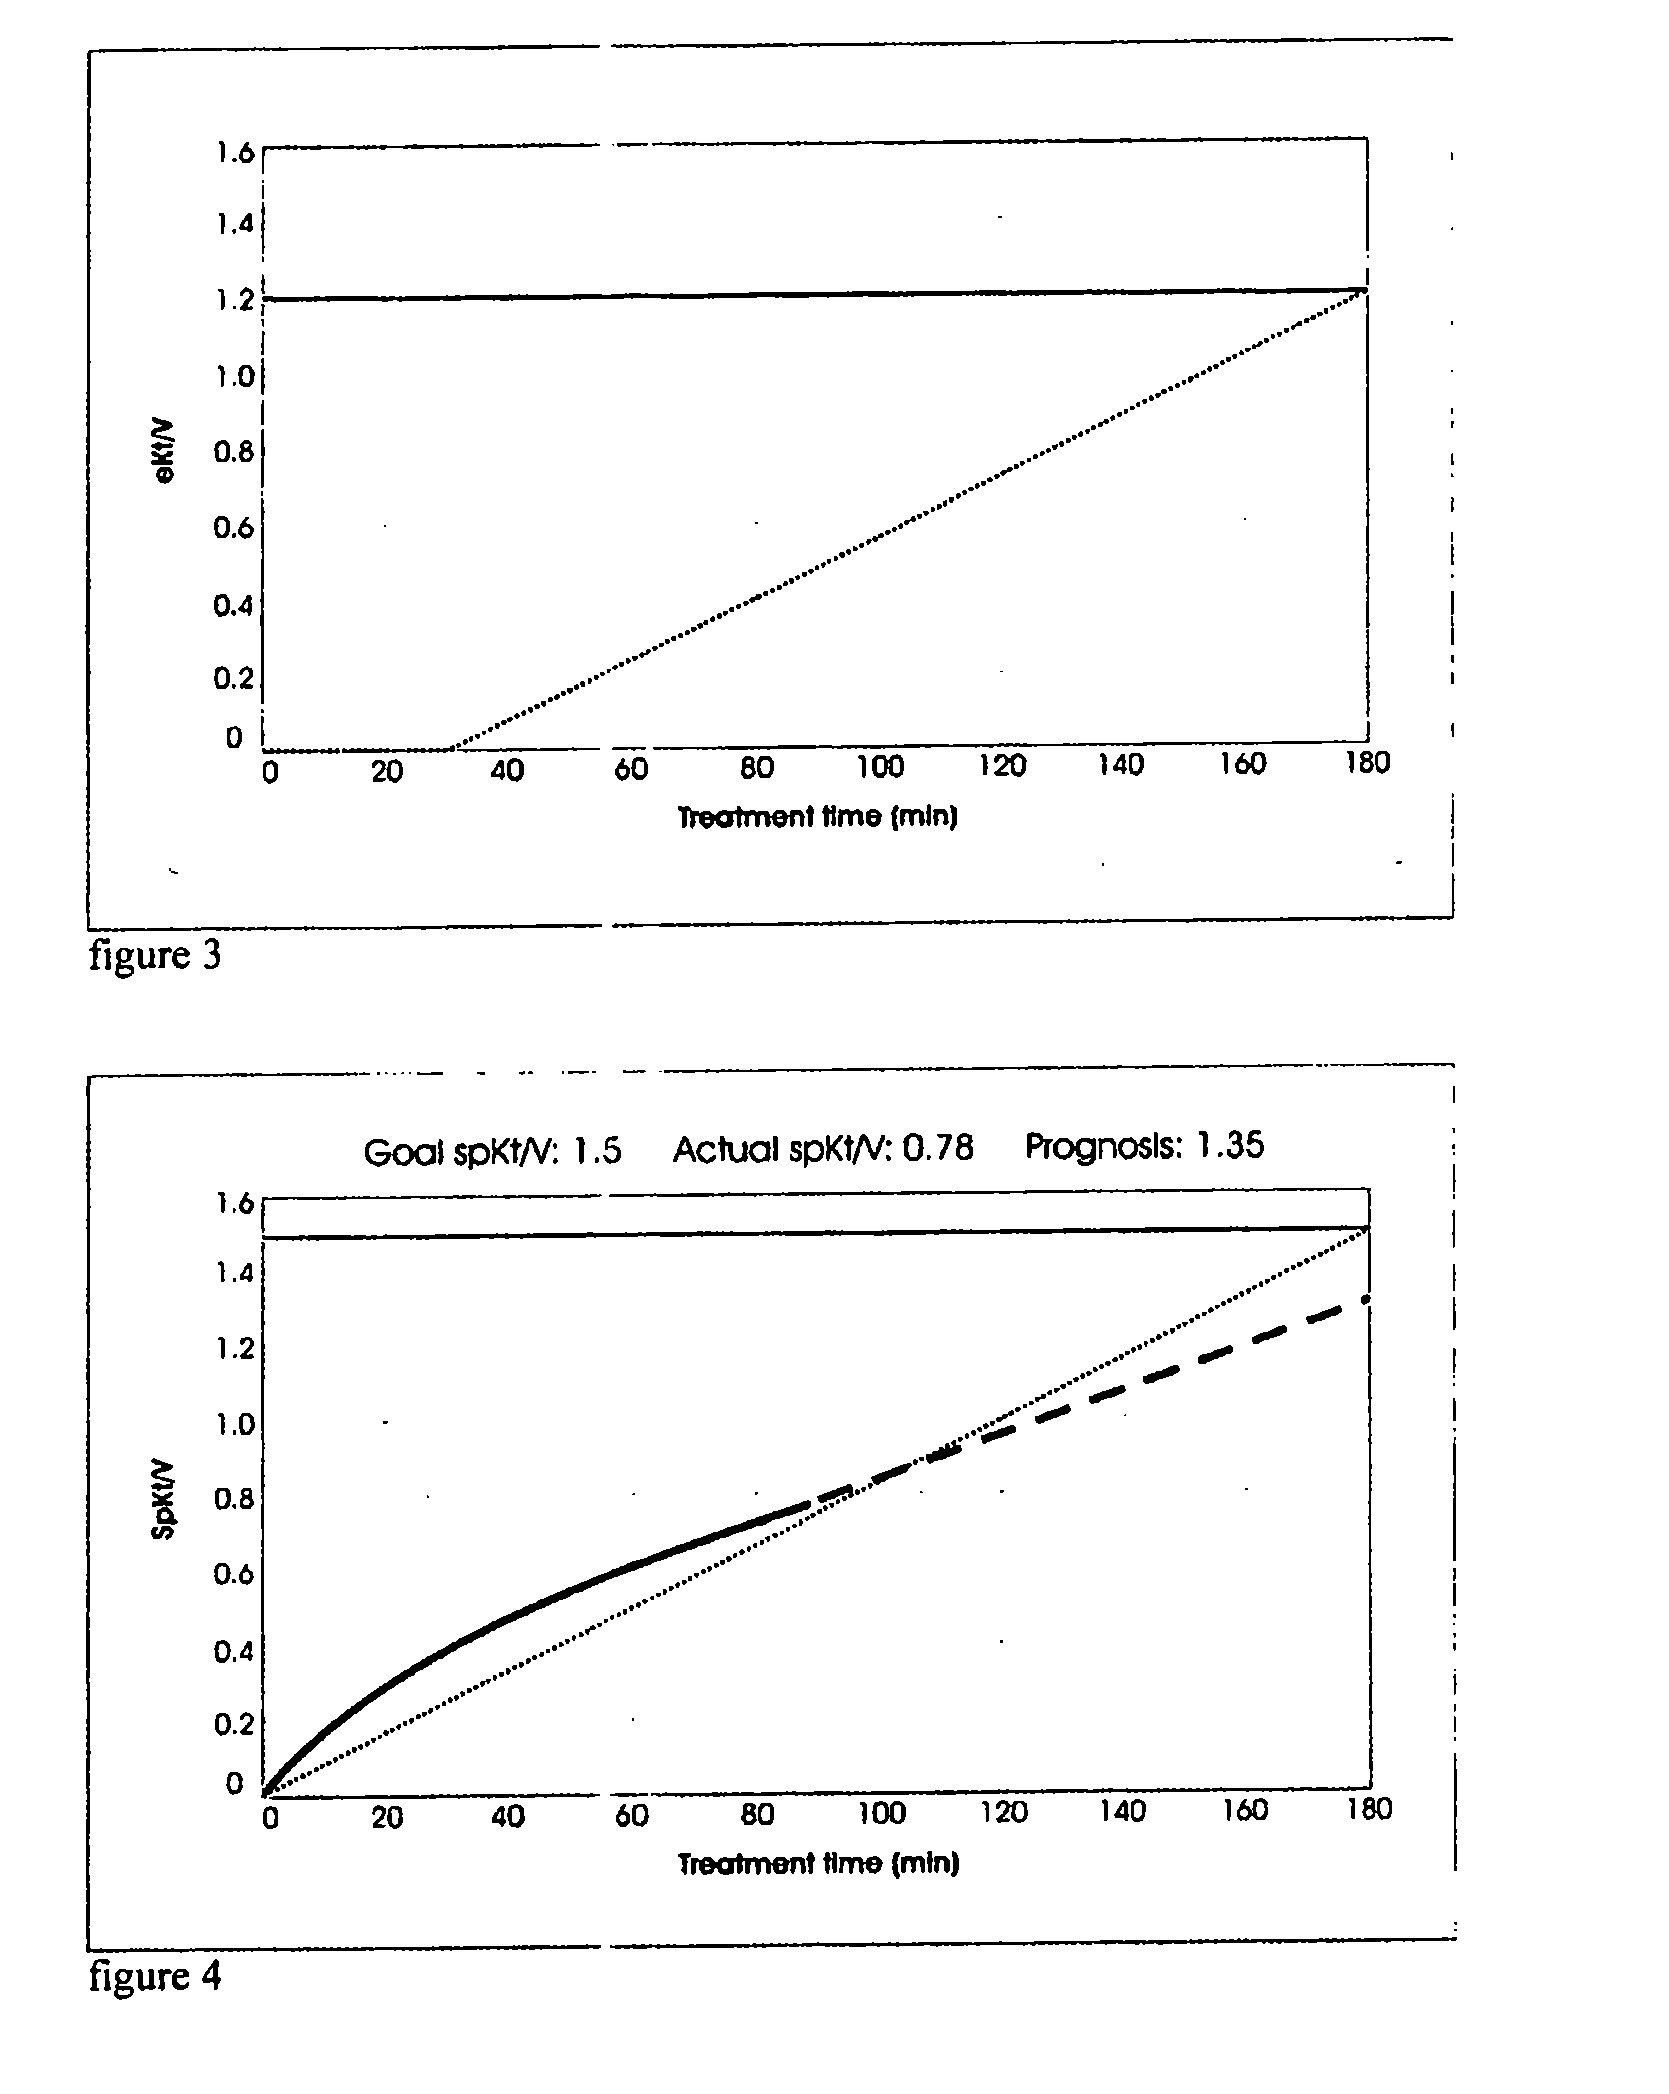 METHOD AND DEVICE TO EARLY PREDICT THE Kt/V PARAMETER IN KIDNEY SUBSTITUTION TREATMENTS